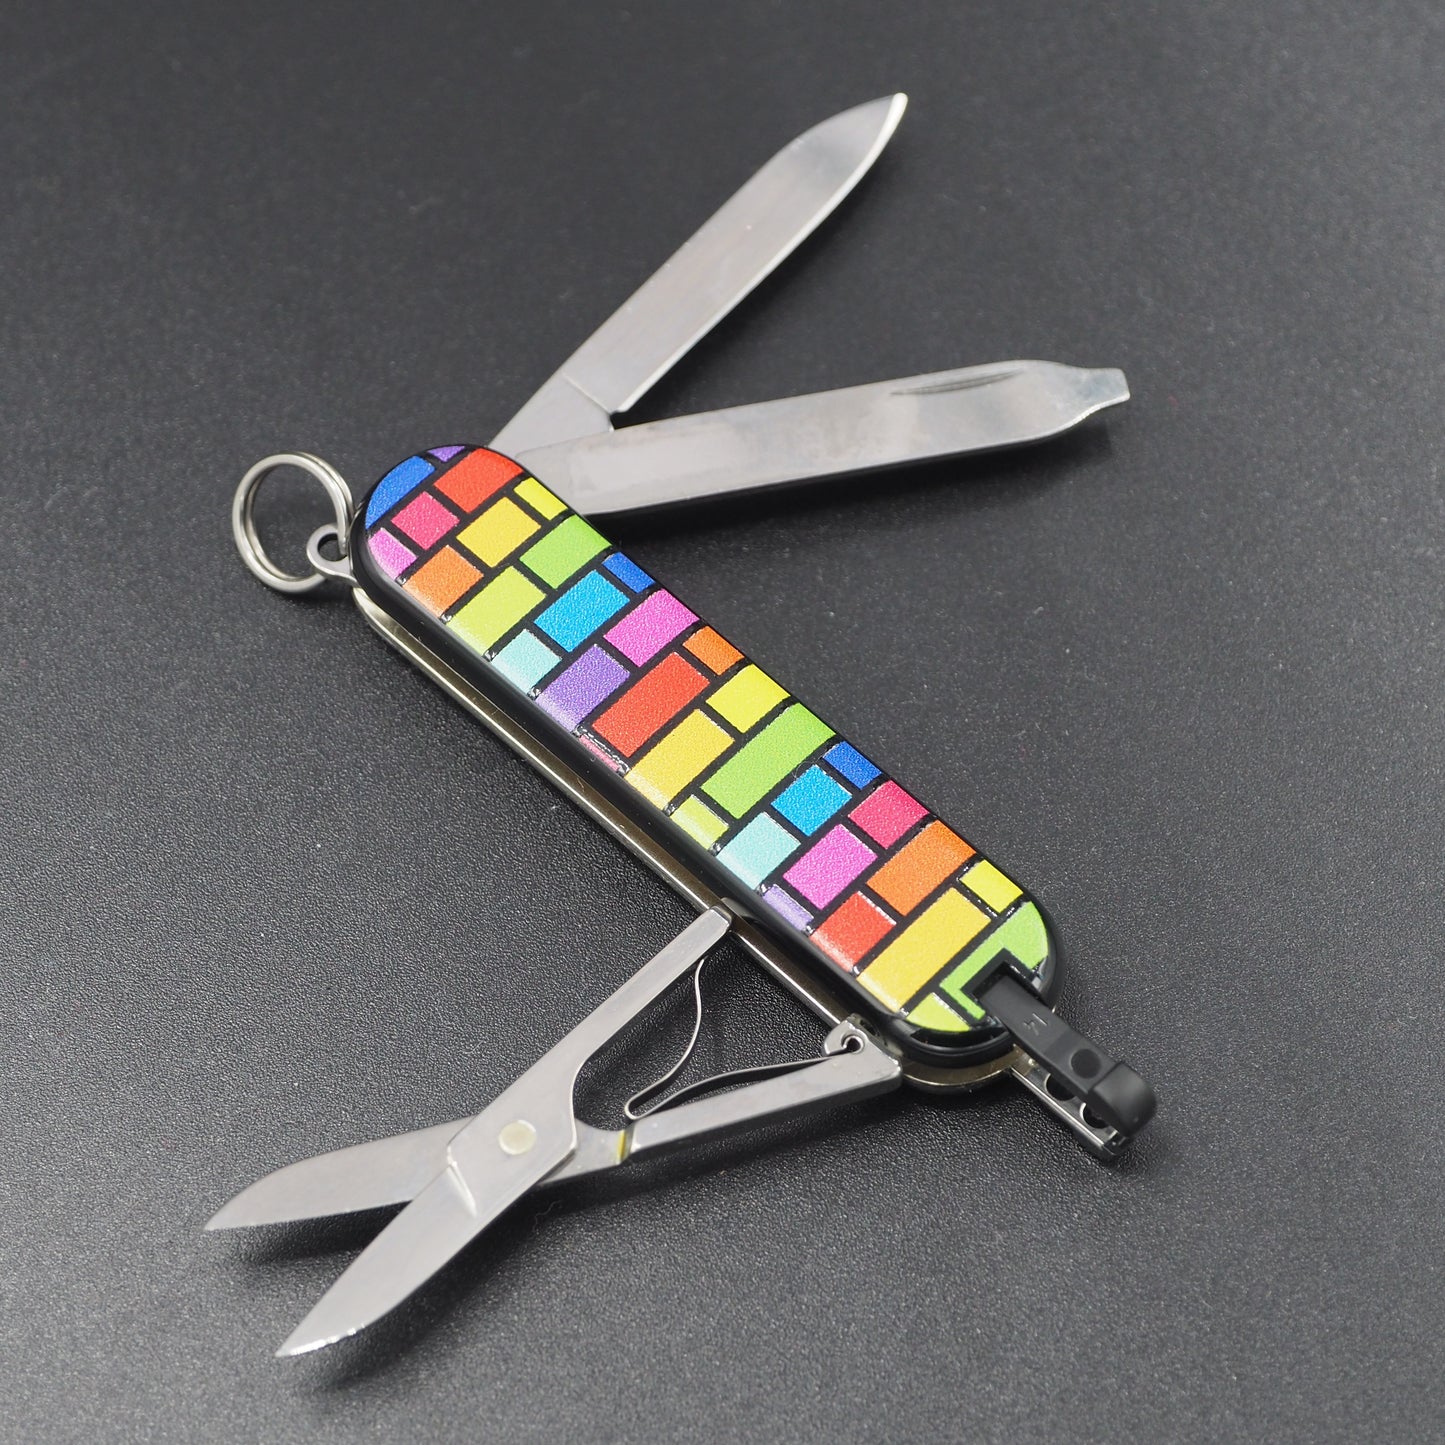 Victorinox Classic Colourful Bricks 3 3D Edition 58mm The Color 3 The Sharp Knife Club Edition